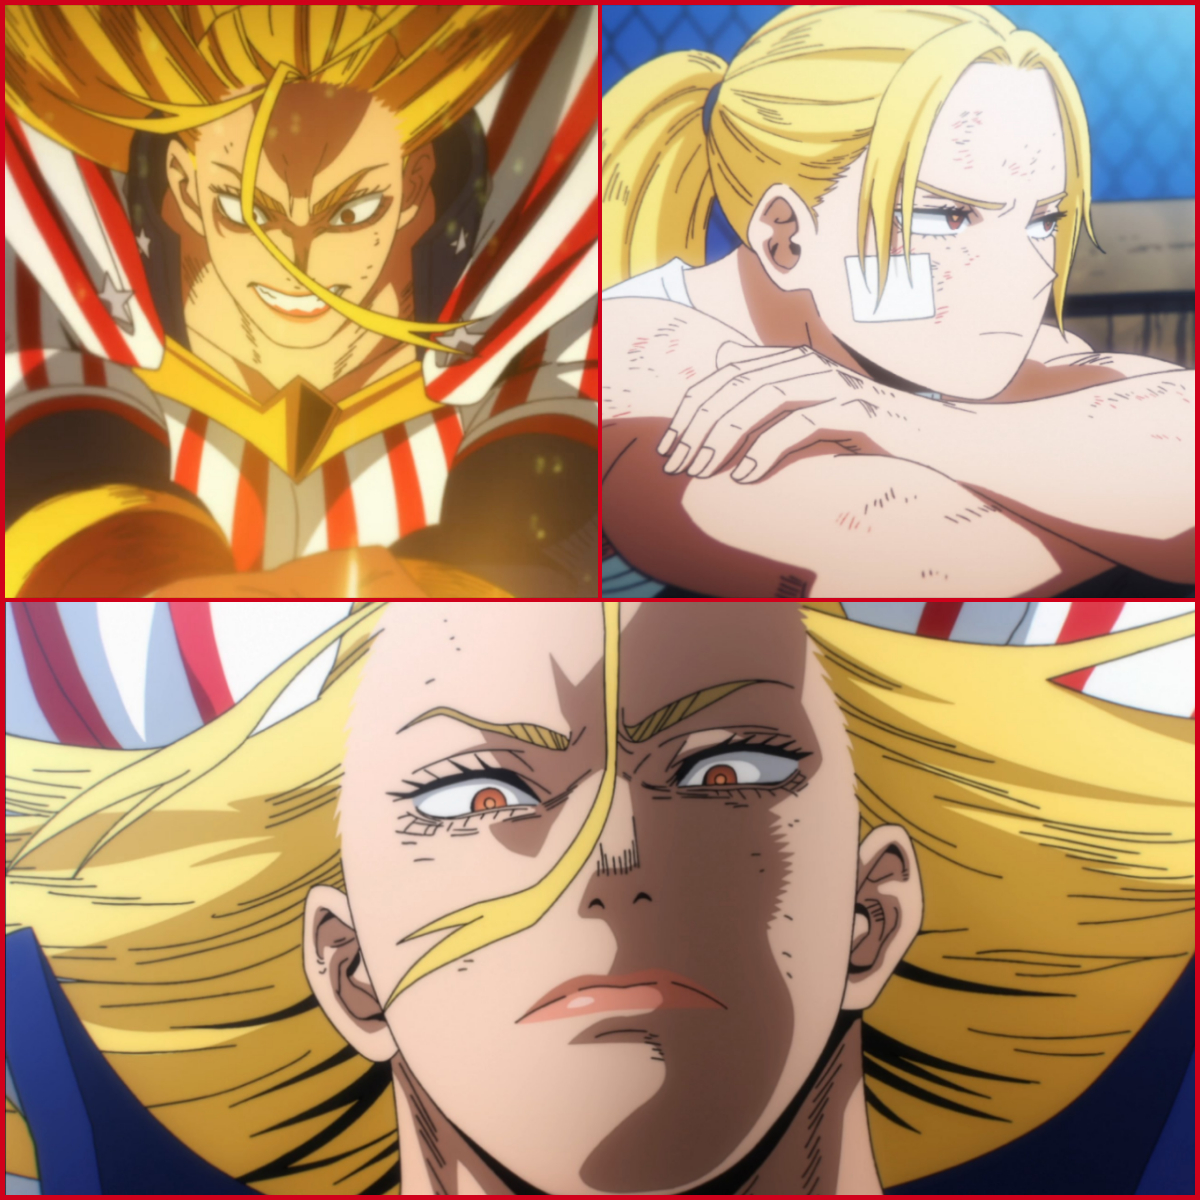 Let's take a moment to appreciate the top US Pro Hero, Star and Stripe!

Anime: My Hero Academia